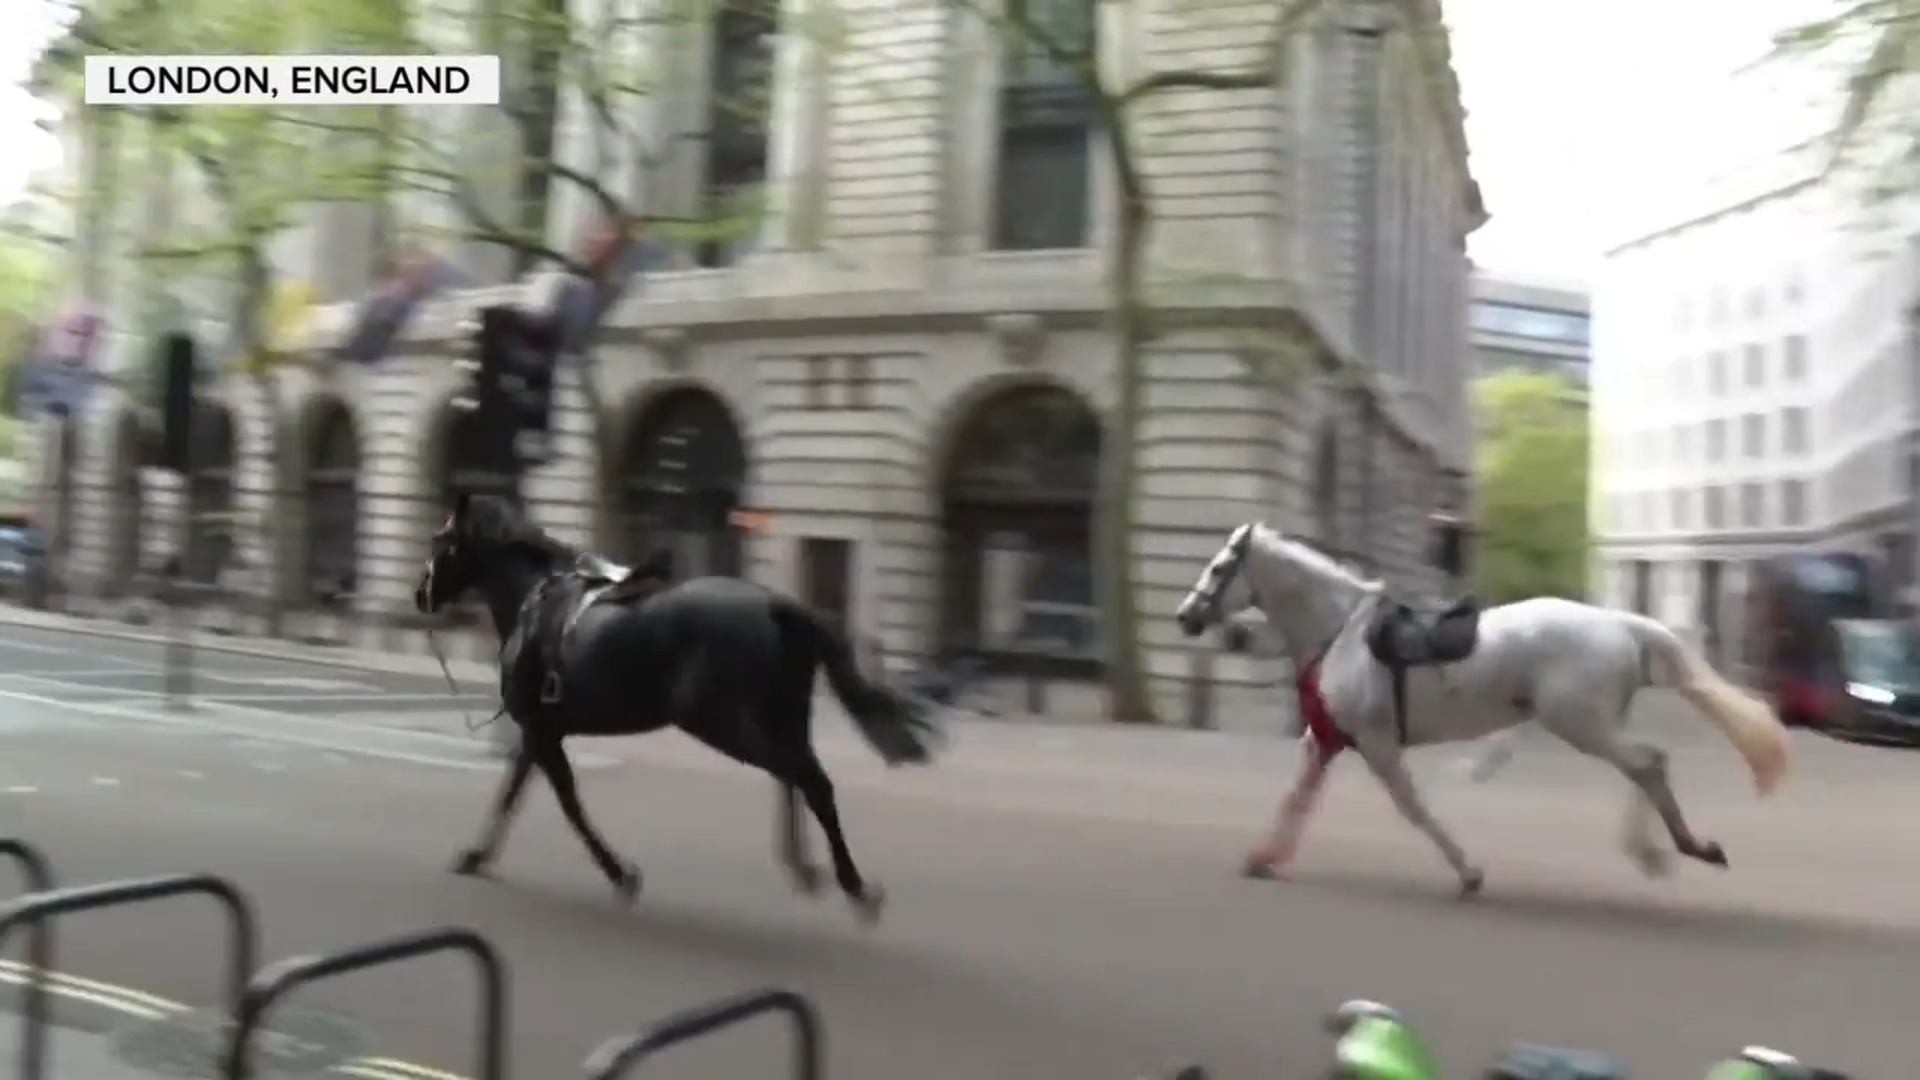 WATCH: Horses run amok in central London